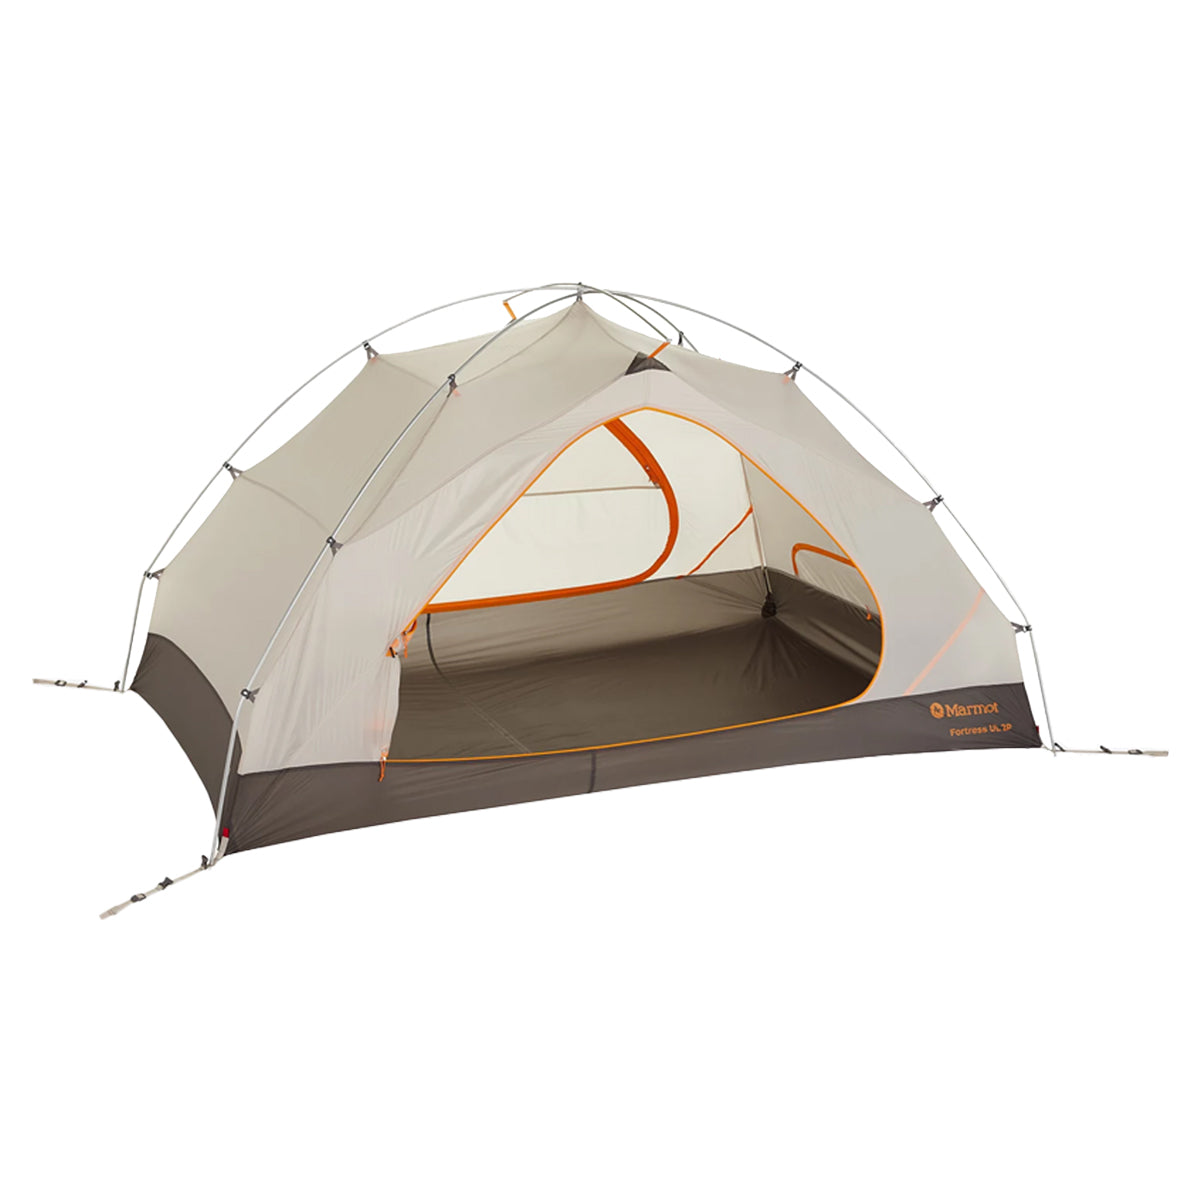 Marmot Fortress UL 2 Person Tent